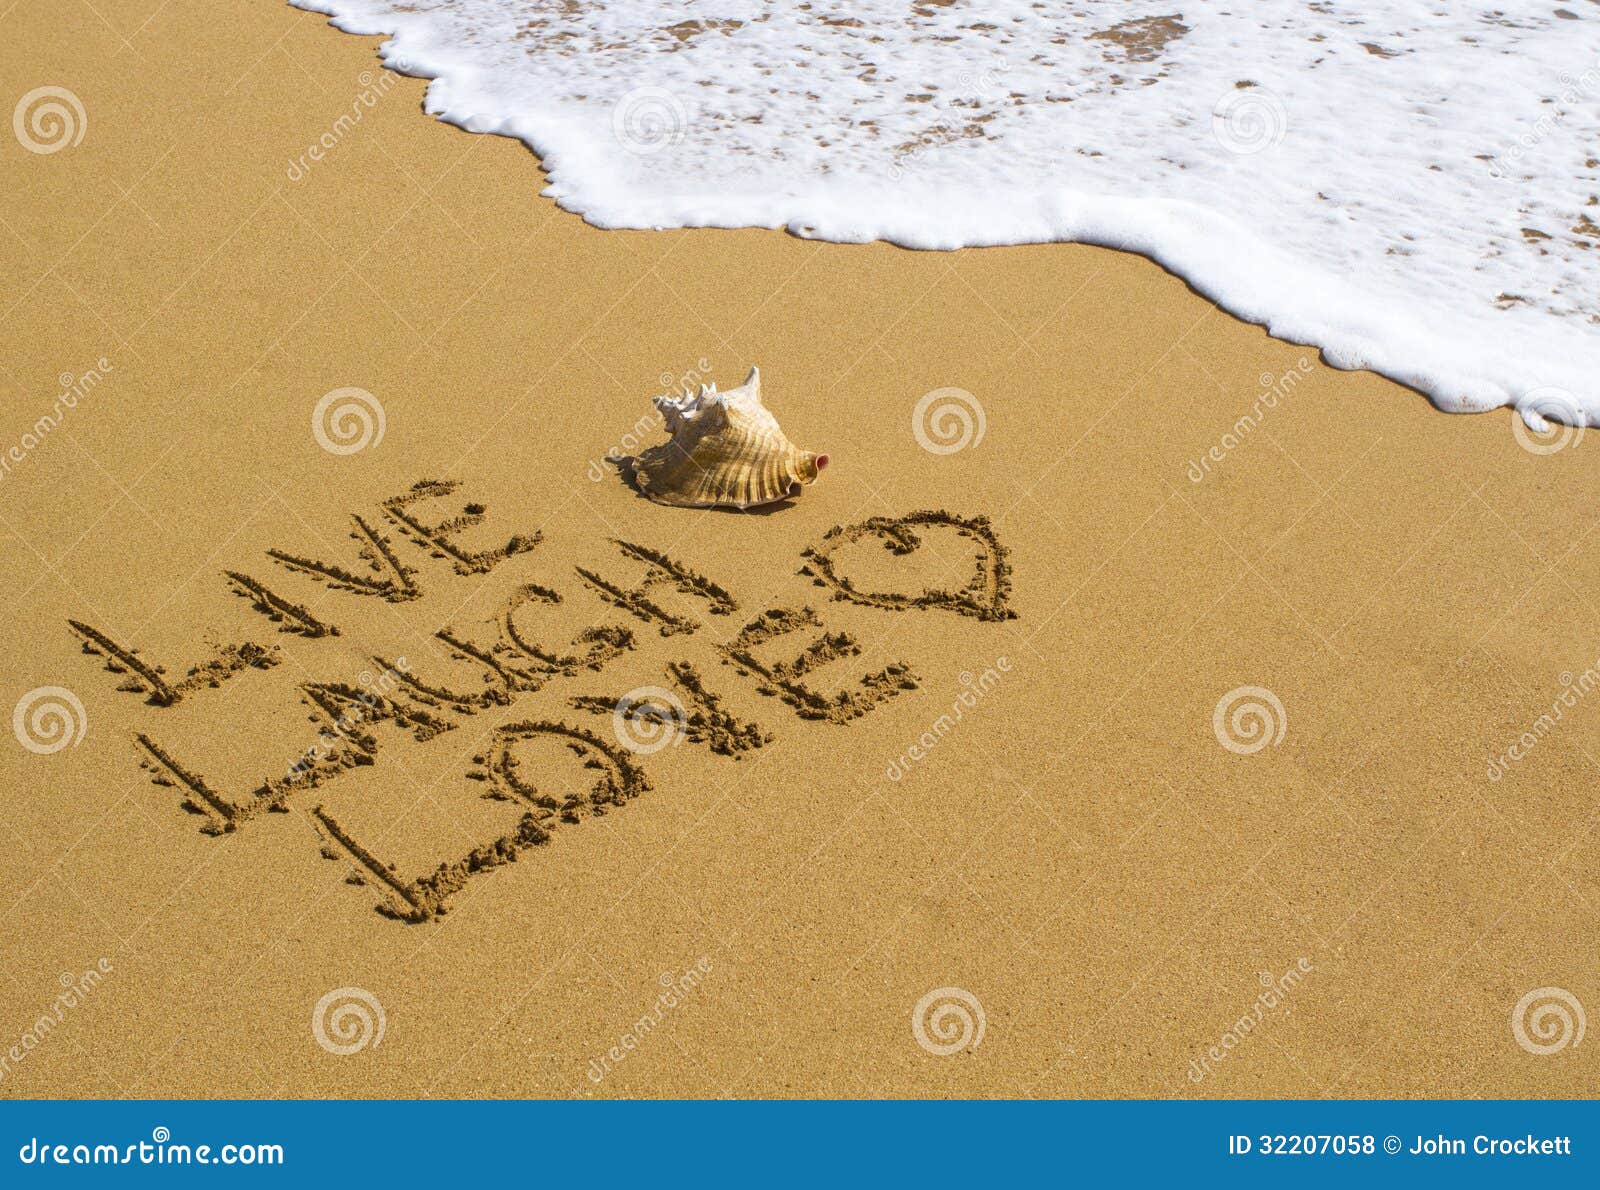 live, laugh, love - message on the beach